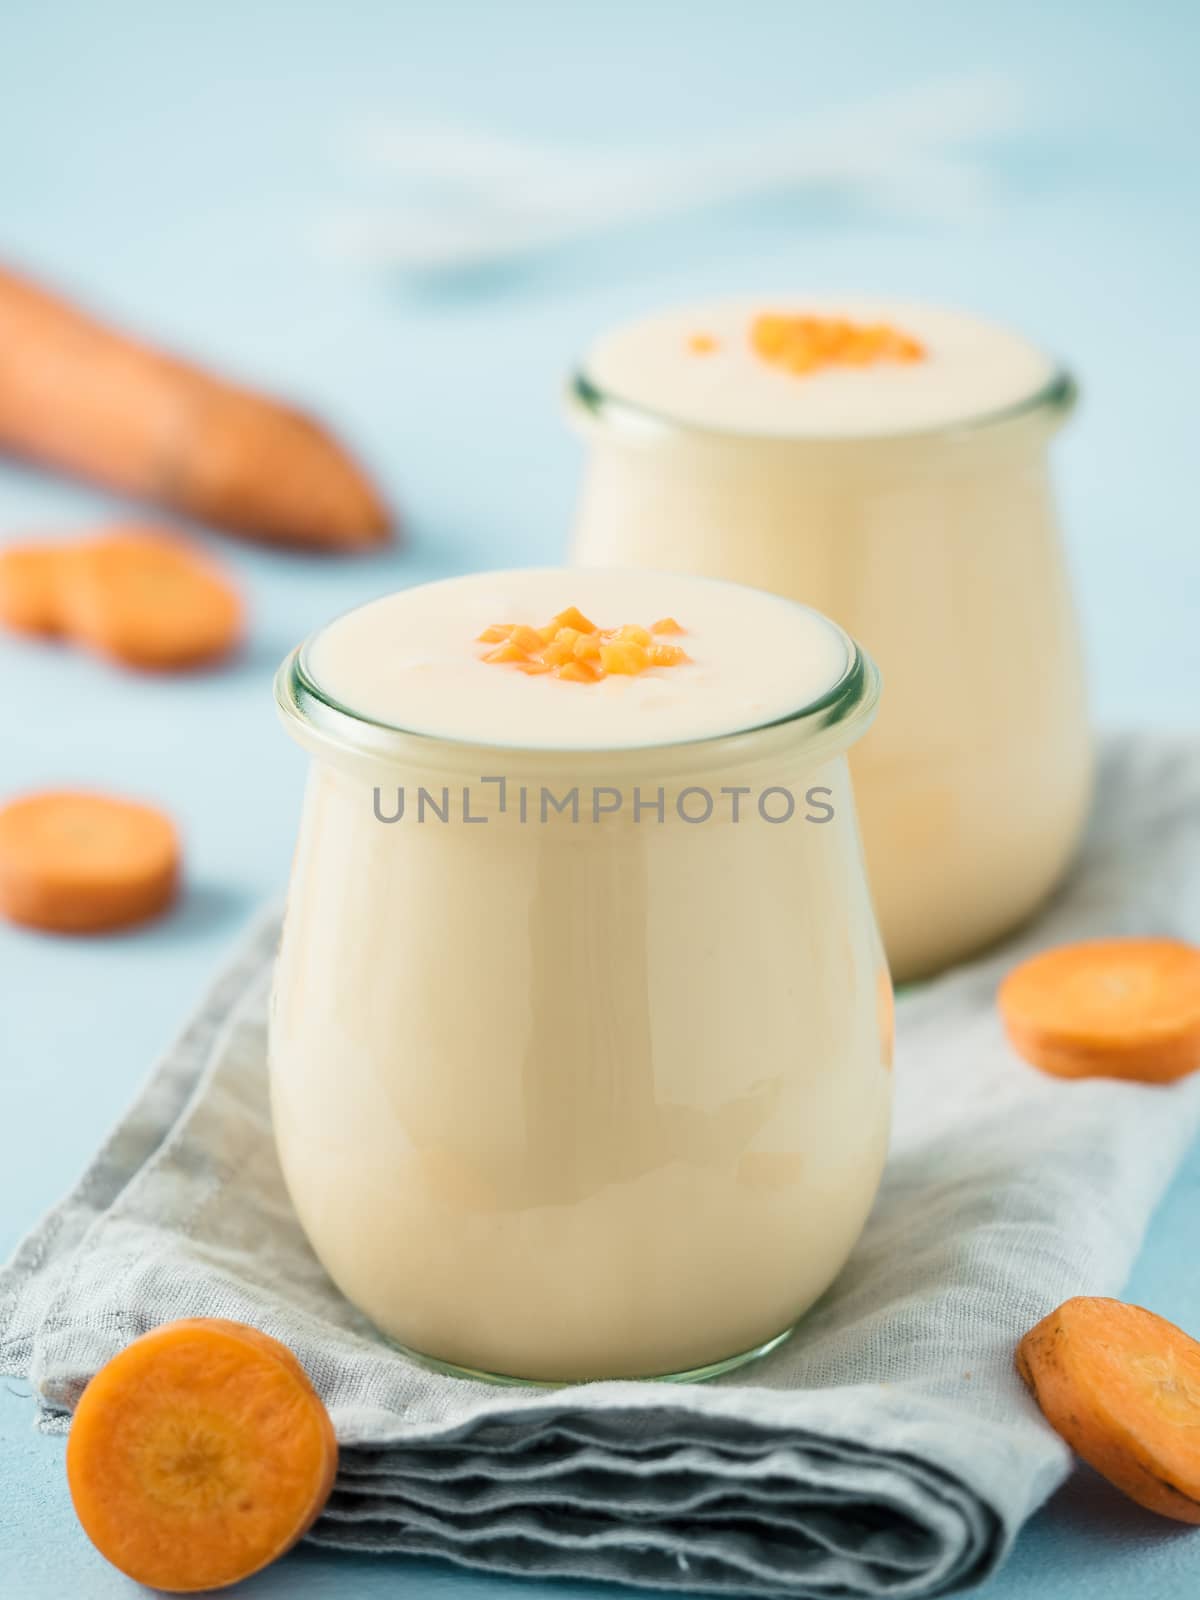 Yogurt with carrot, copy space by fascinadora